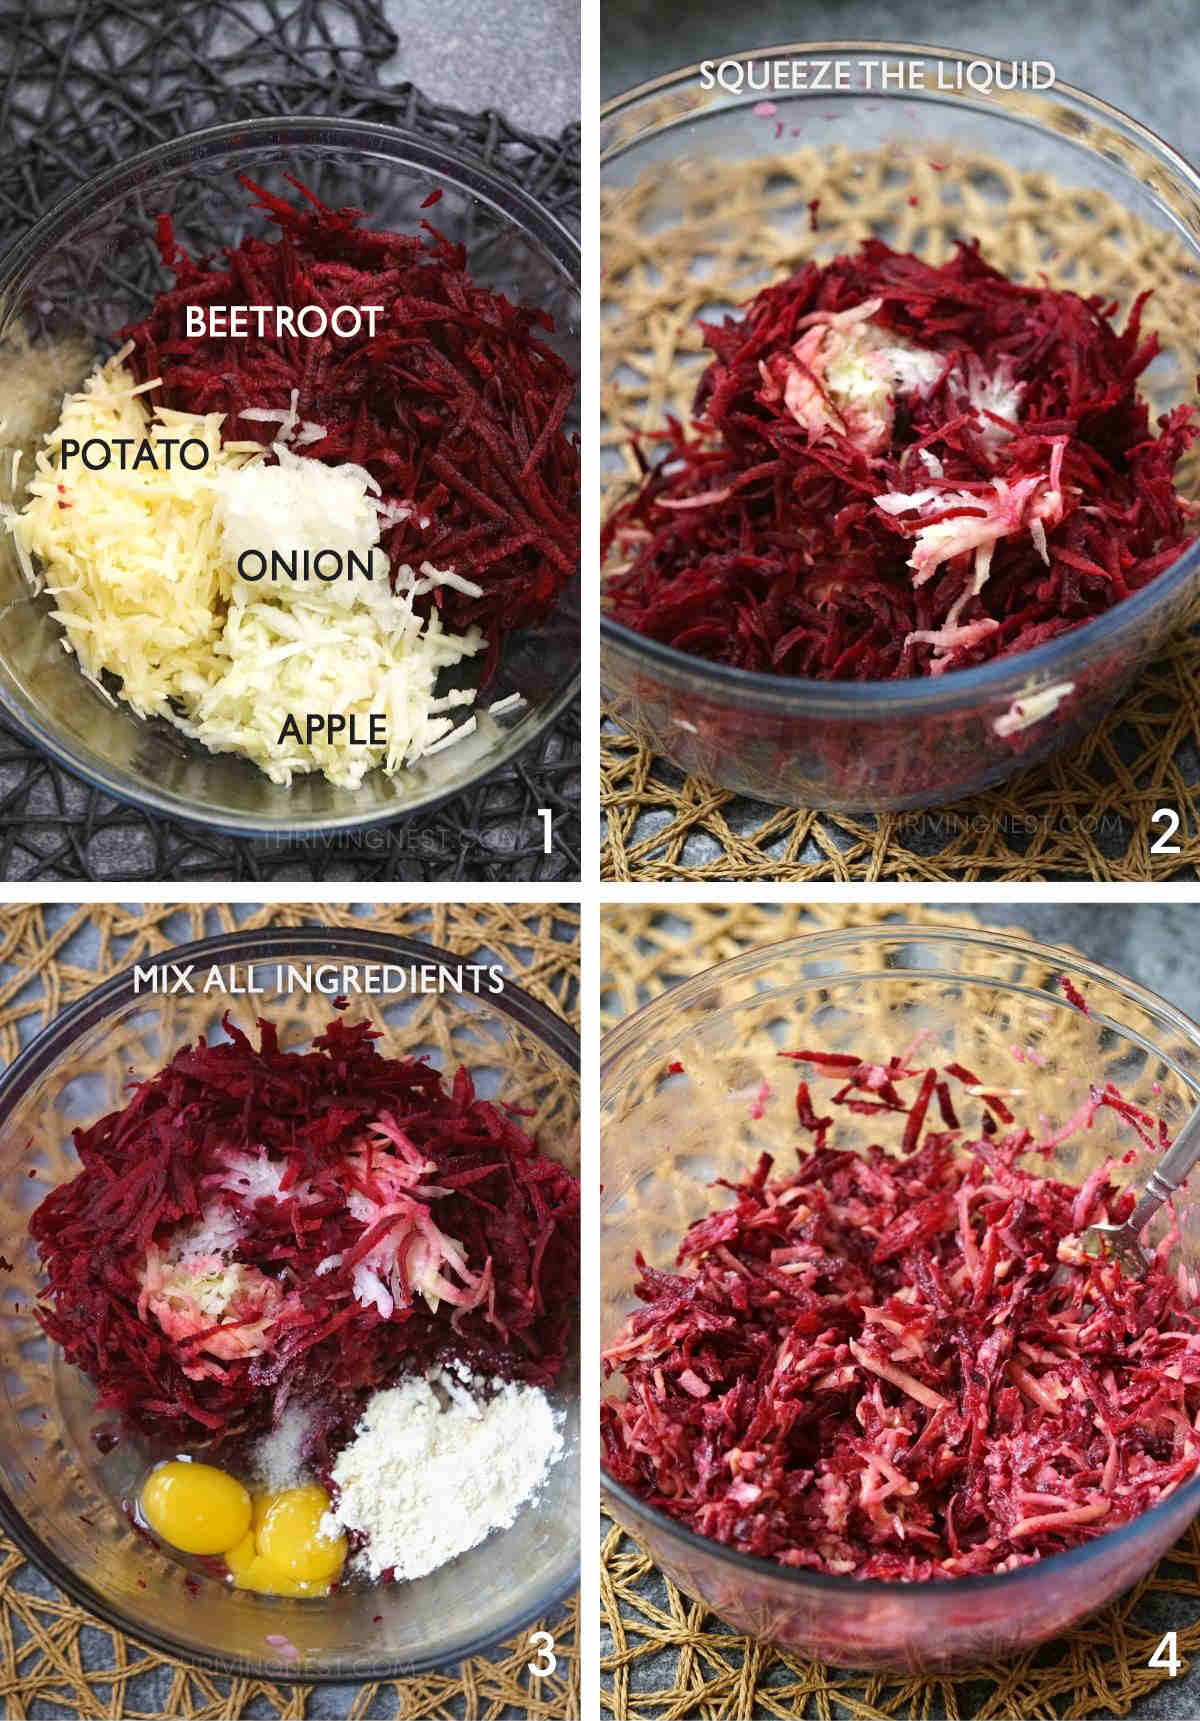 Process shots showing the ingredients and how to combine the beetroot, potato, apple, egg and flour to make beet fritters.